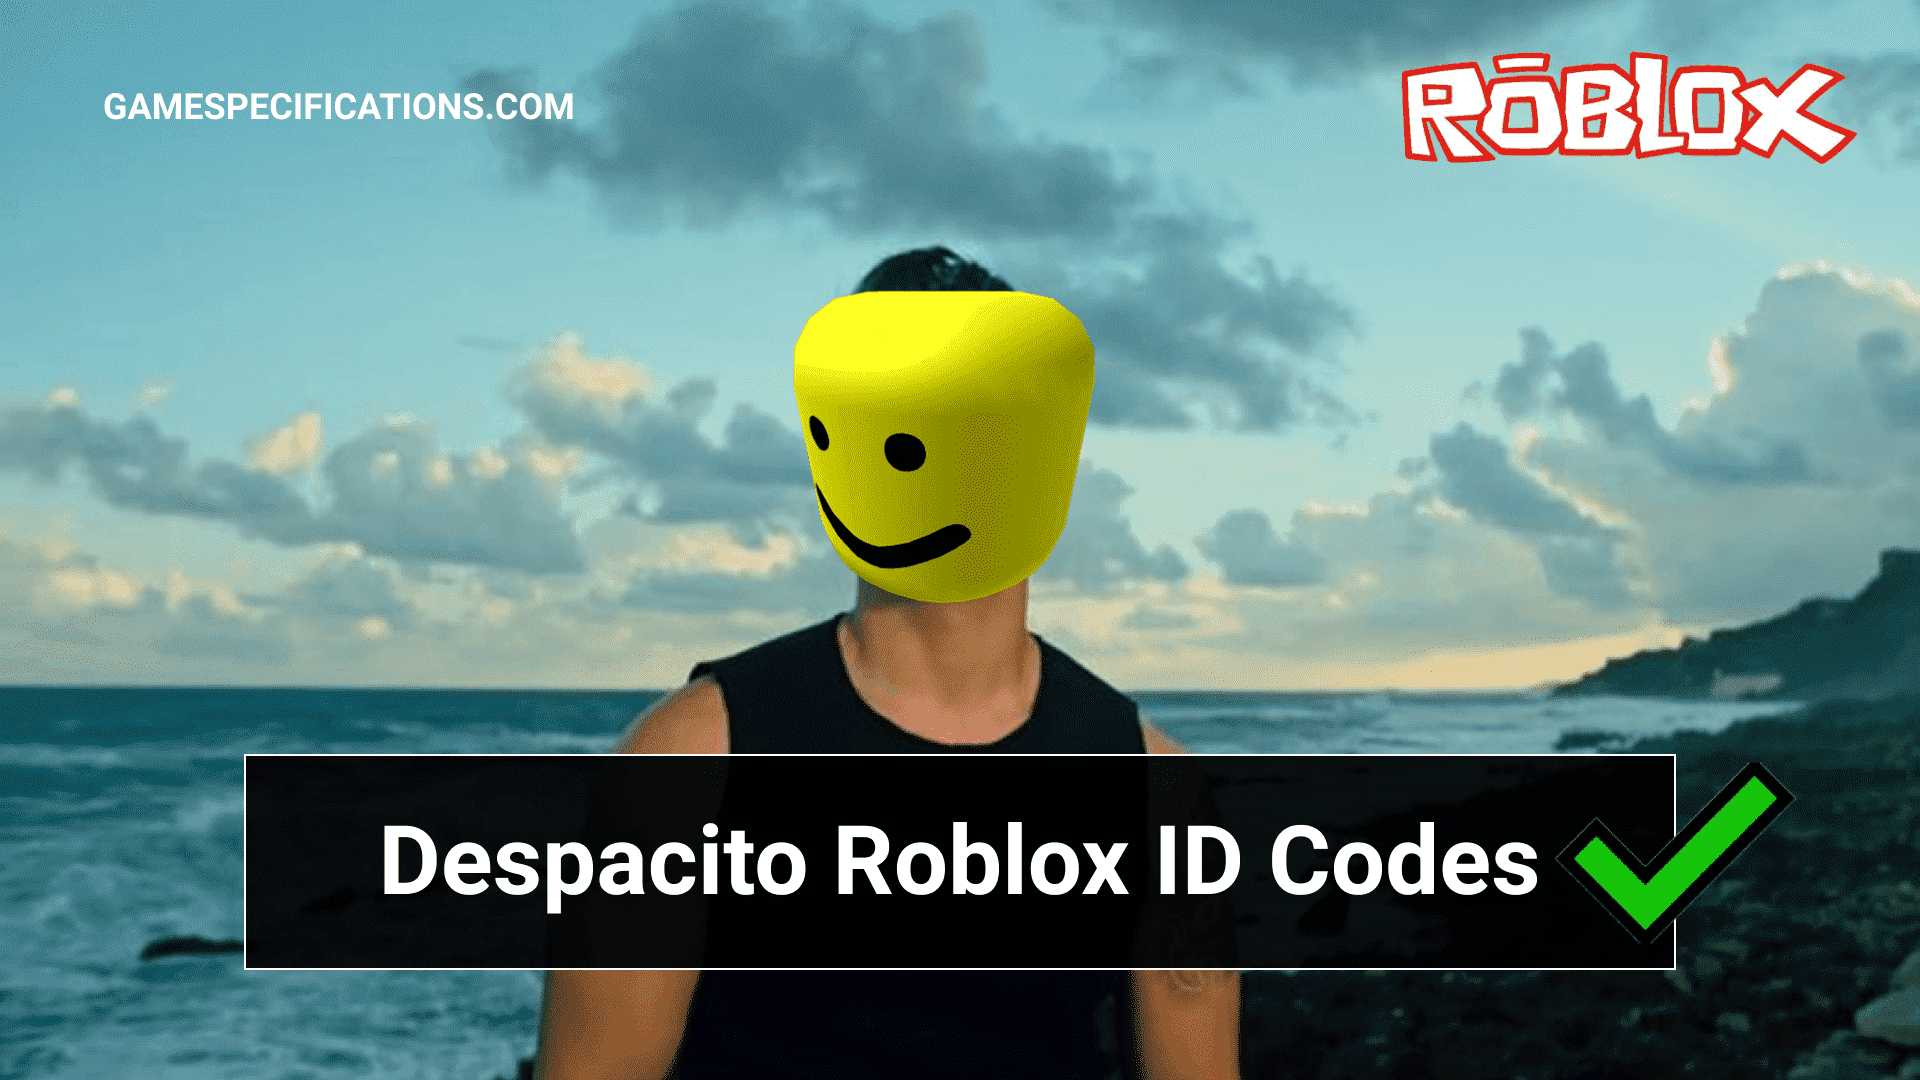 Despacito Roblox Id Codes To Play Awesome Spanish Song 2021 Game Specifications - roblox code for despacito